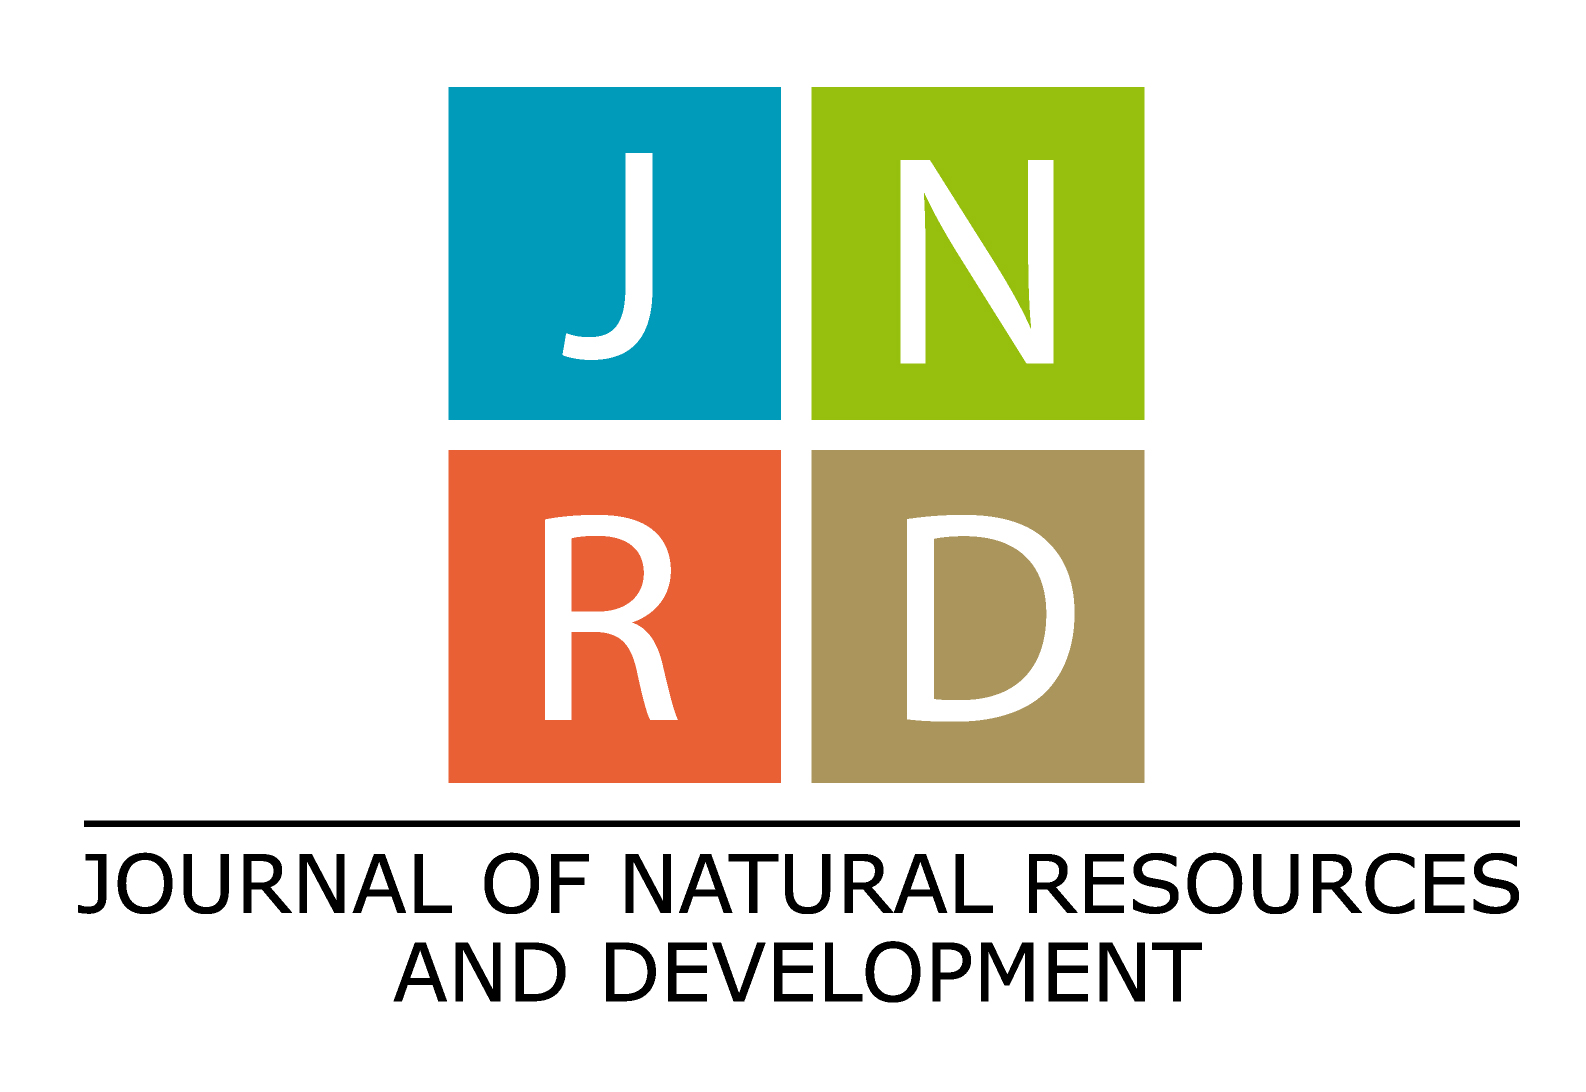 JNRD - Journal of Natural Resources and Development